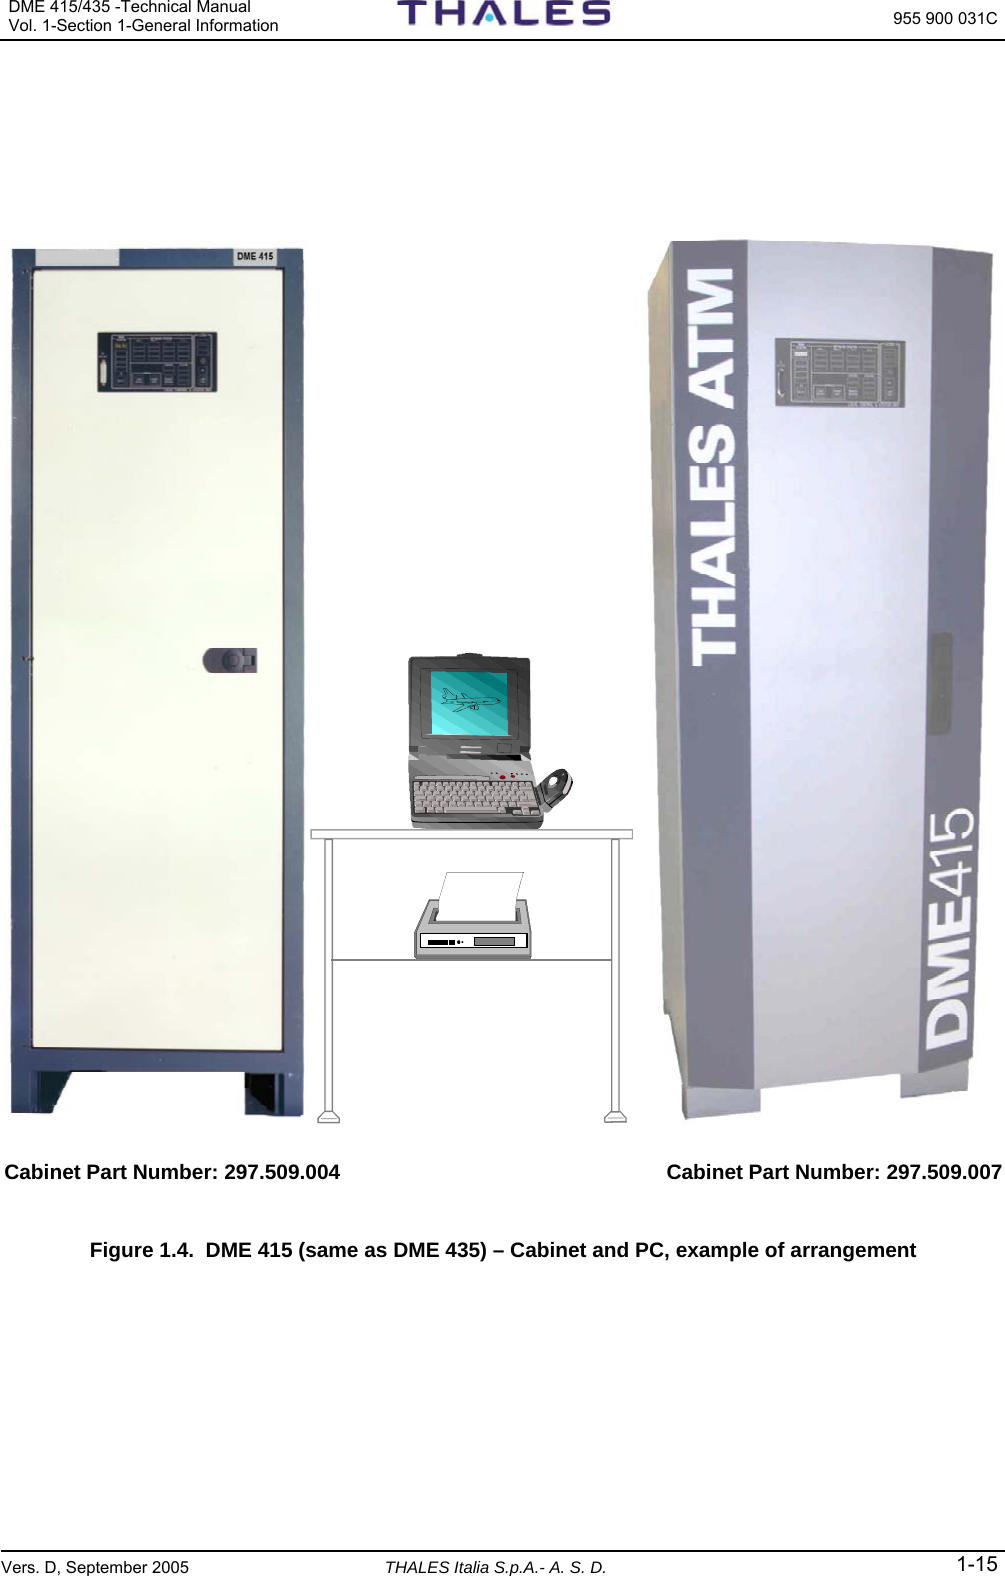 DME 415/435 -Technical Manual Vol. 1-Section 1-General Information  955 900 031C Vers. D, September 2005 THALES Italia S.p.A.- A. S. D. 1-15       Cabinet Part Number: 297.509.004  Cabinet Part Number: 297.509.007  Figure 1.4.  DME 415 (same as DME 435) – Cabinet and PC, example of arrangement  